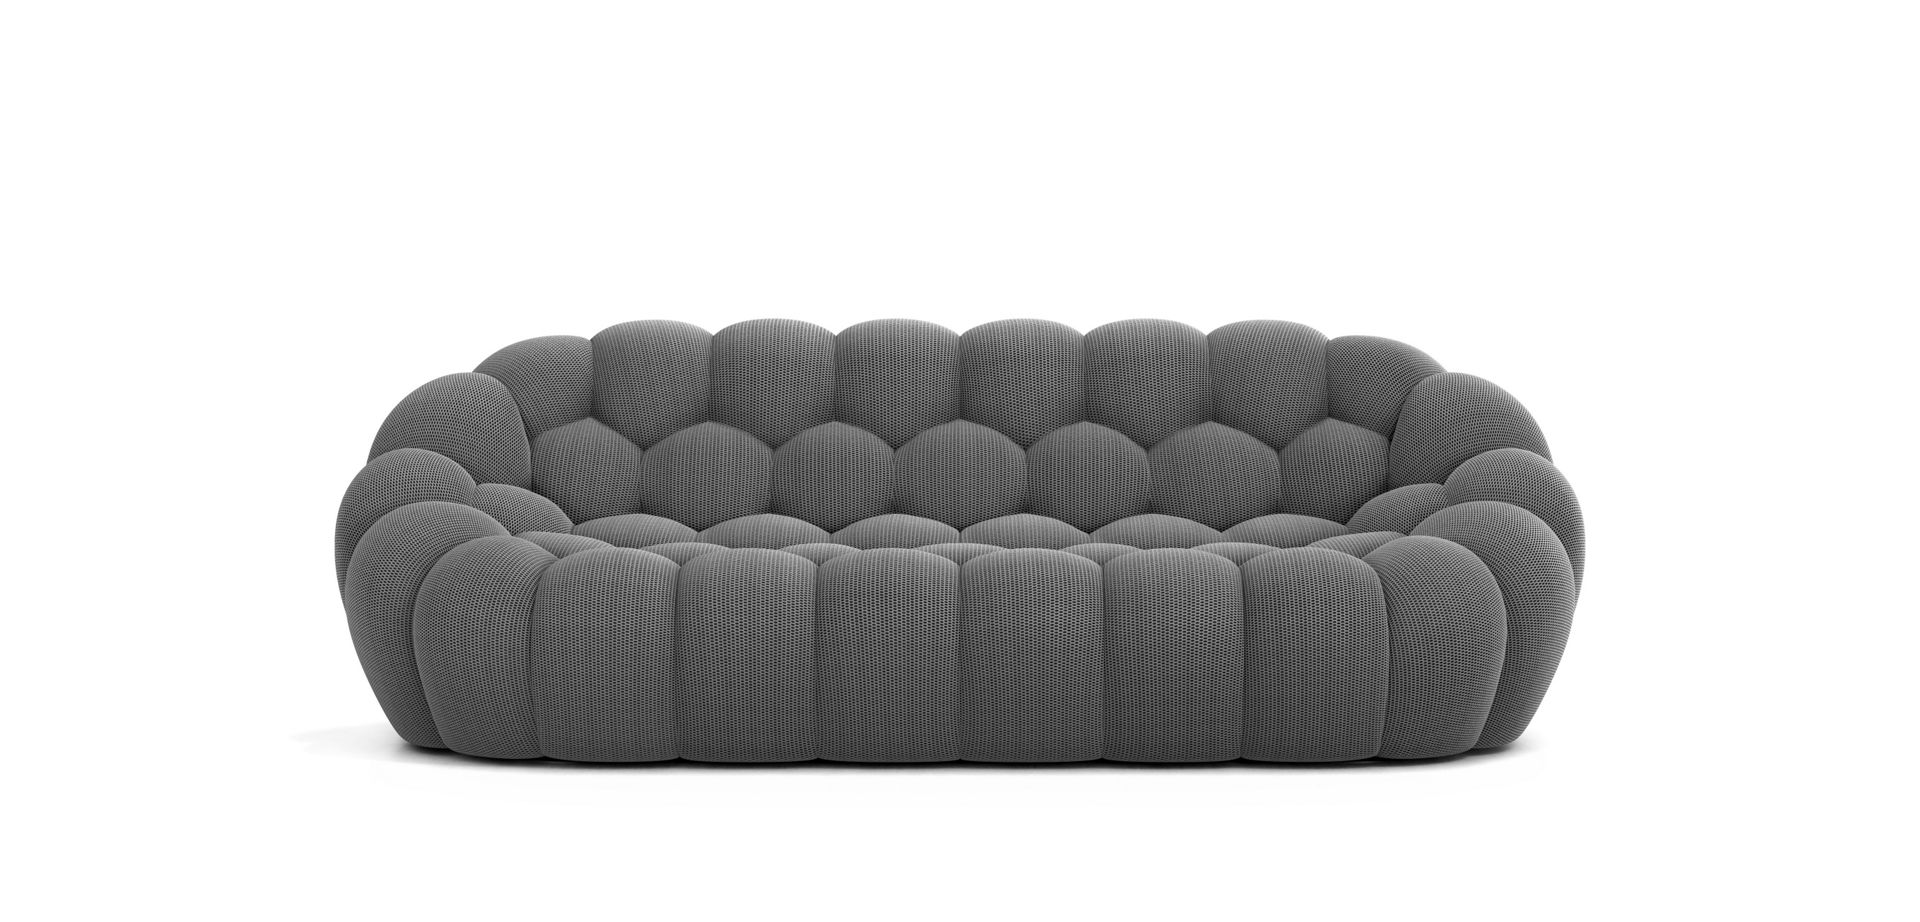 large 3-seat sofa - techno 3D image number 10